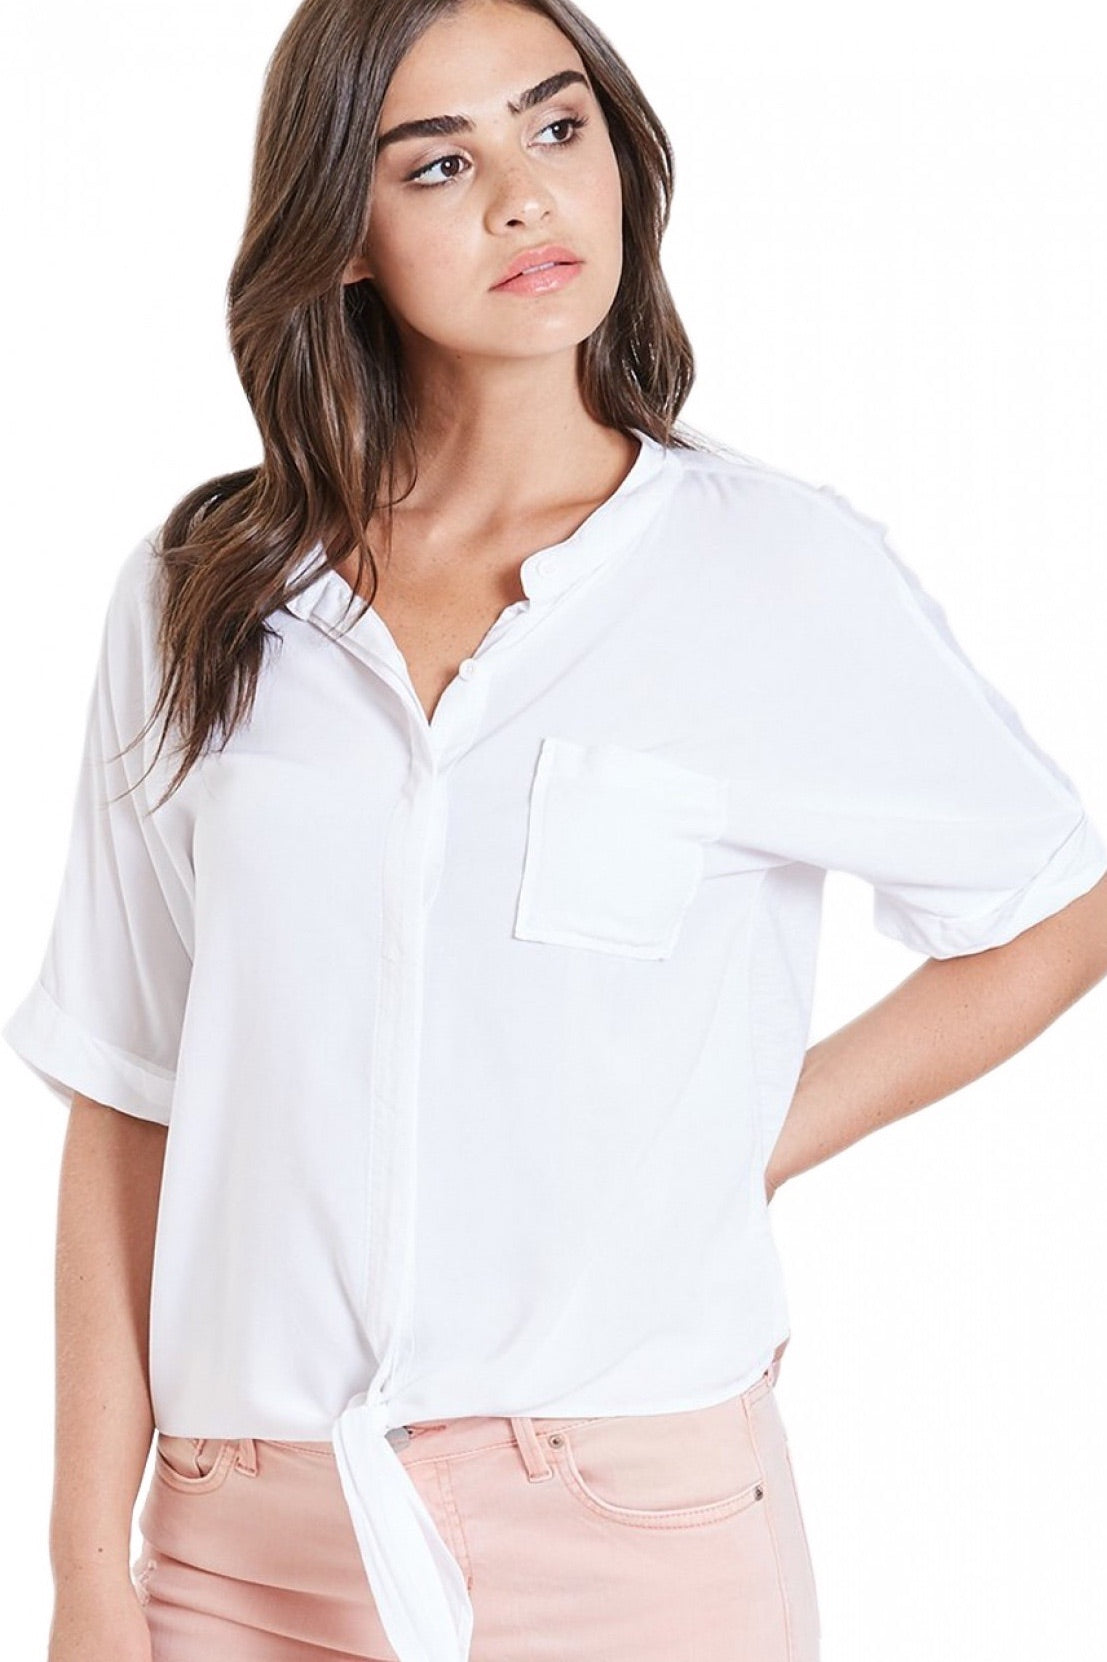 Hanna Short Sleeve Tie Front Top in White